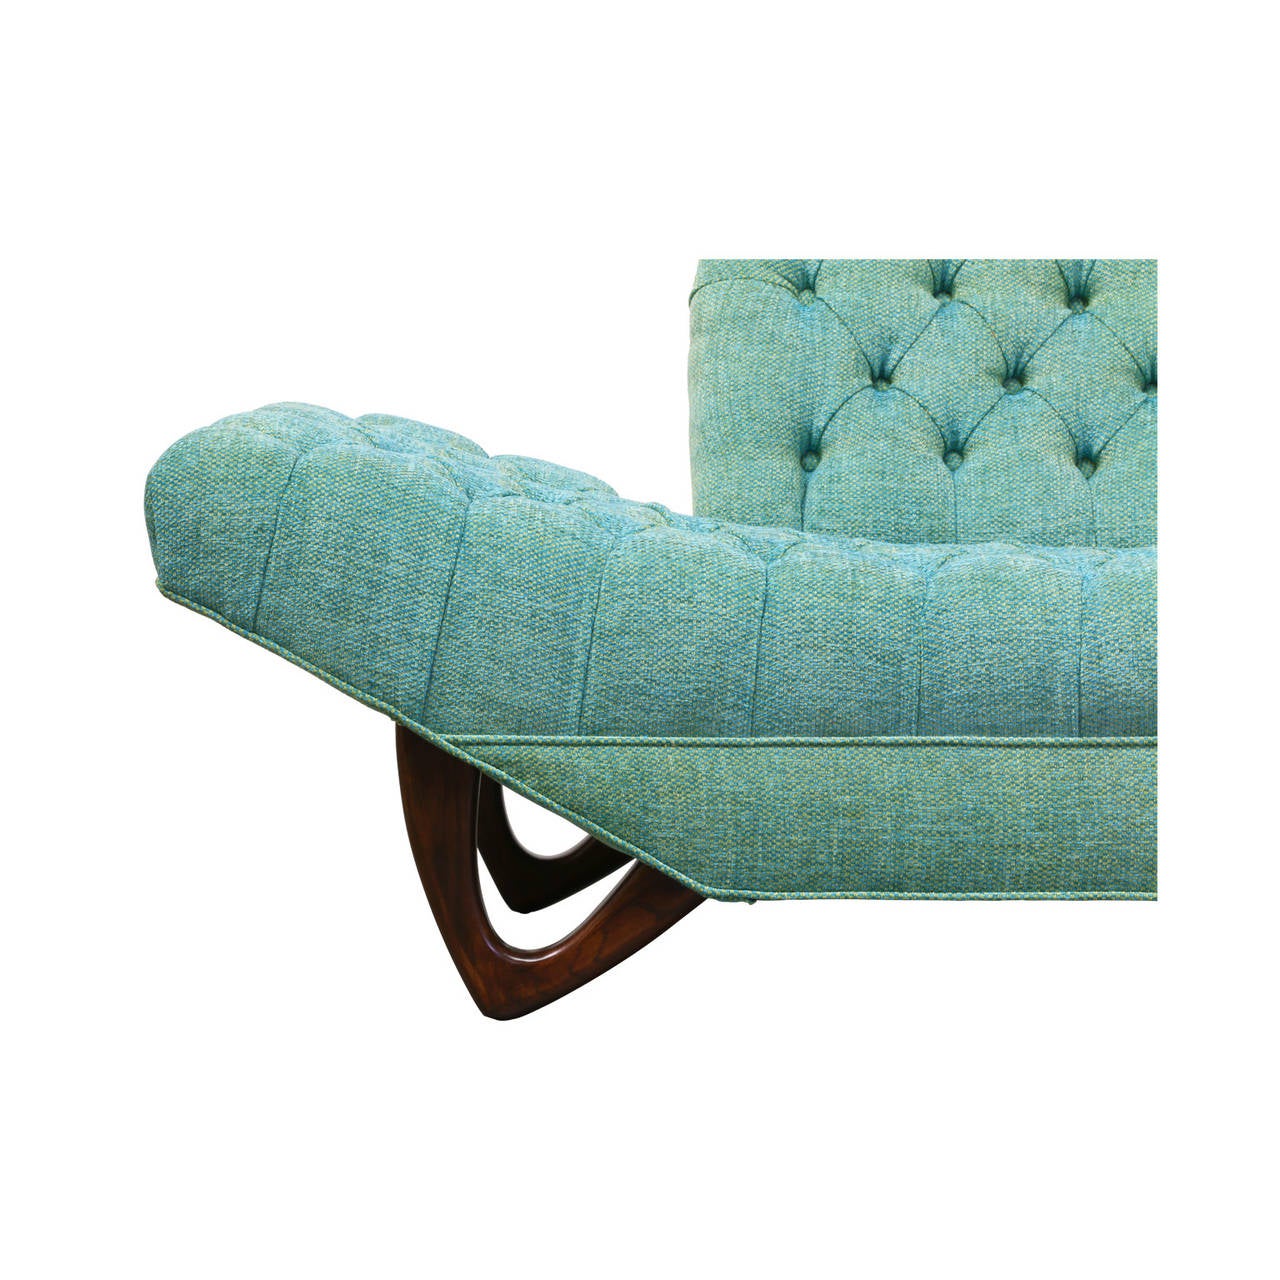 American Craft Associates Style Tufted Sofa or Chaise Lounge